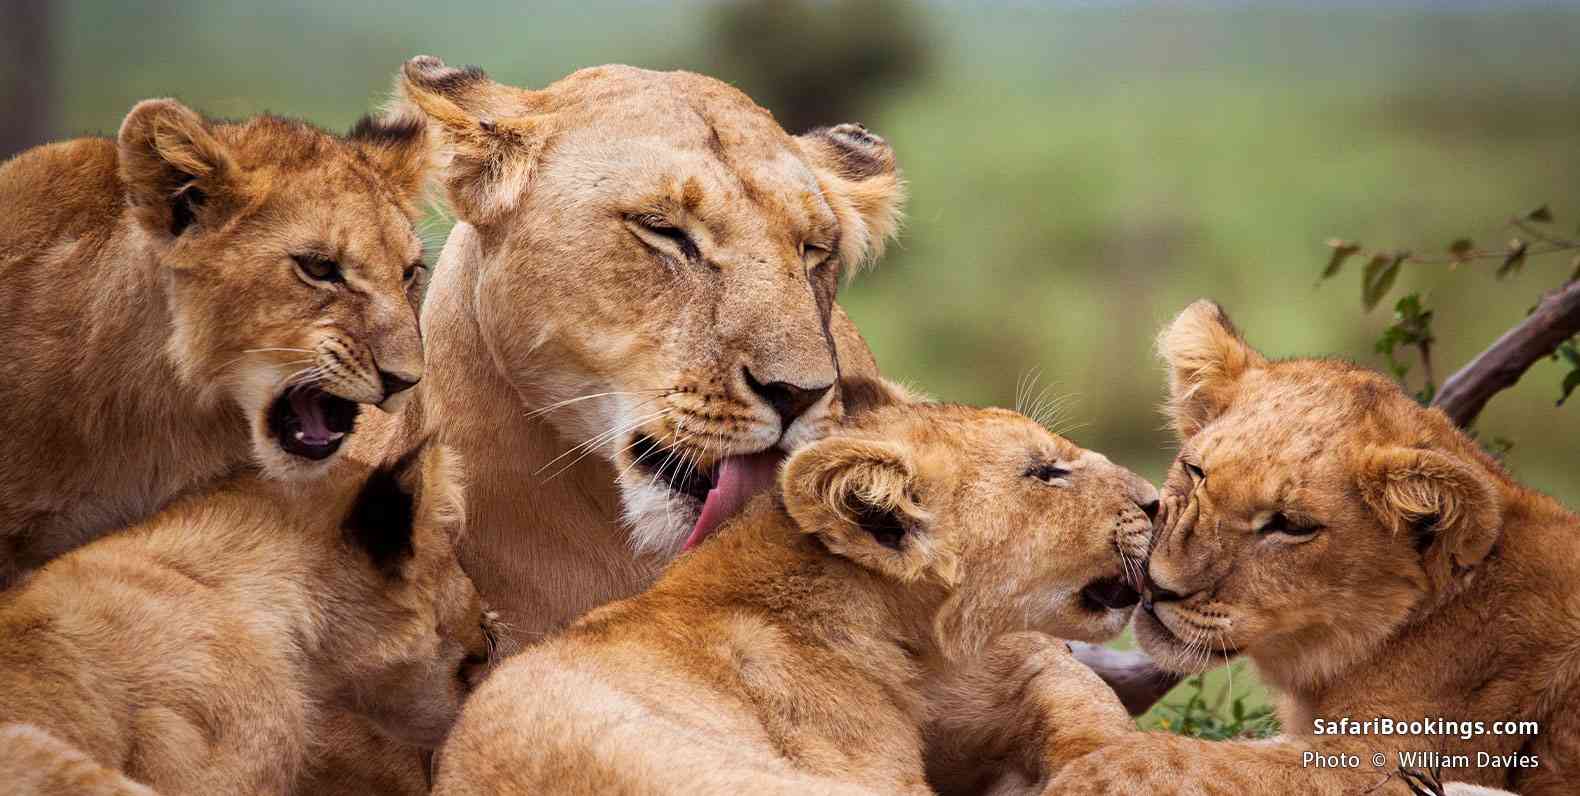 Lioness with cubs in Masai Mara National Reserve